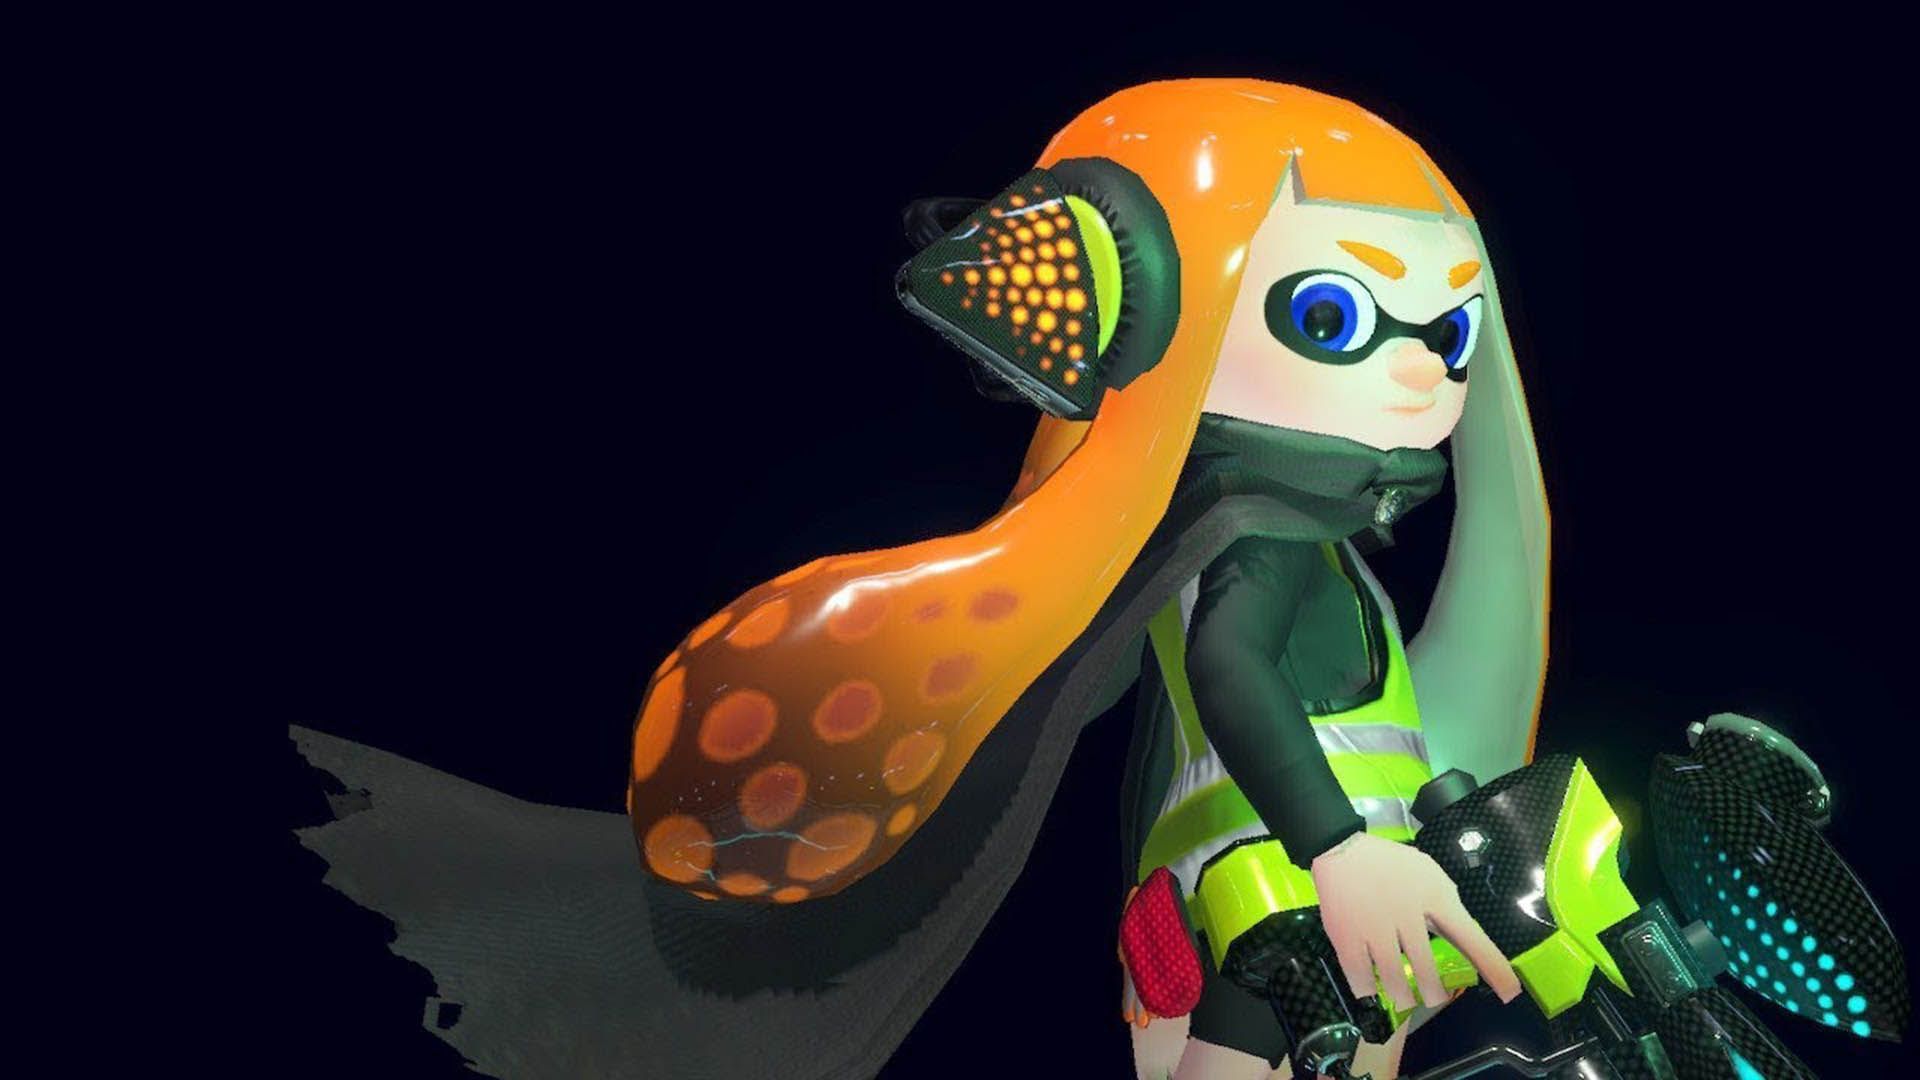 Character Column: Inklings, Octolings, and the conundrum of player